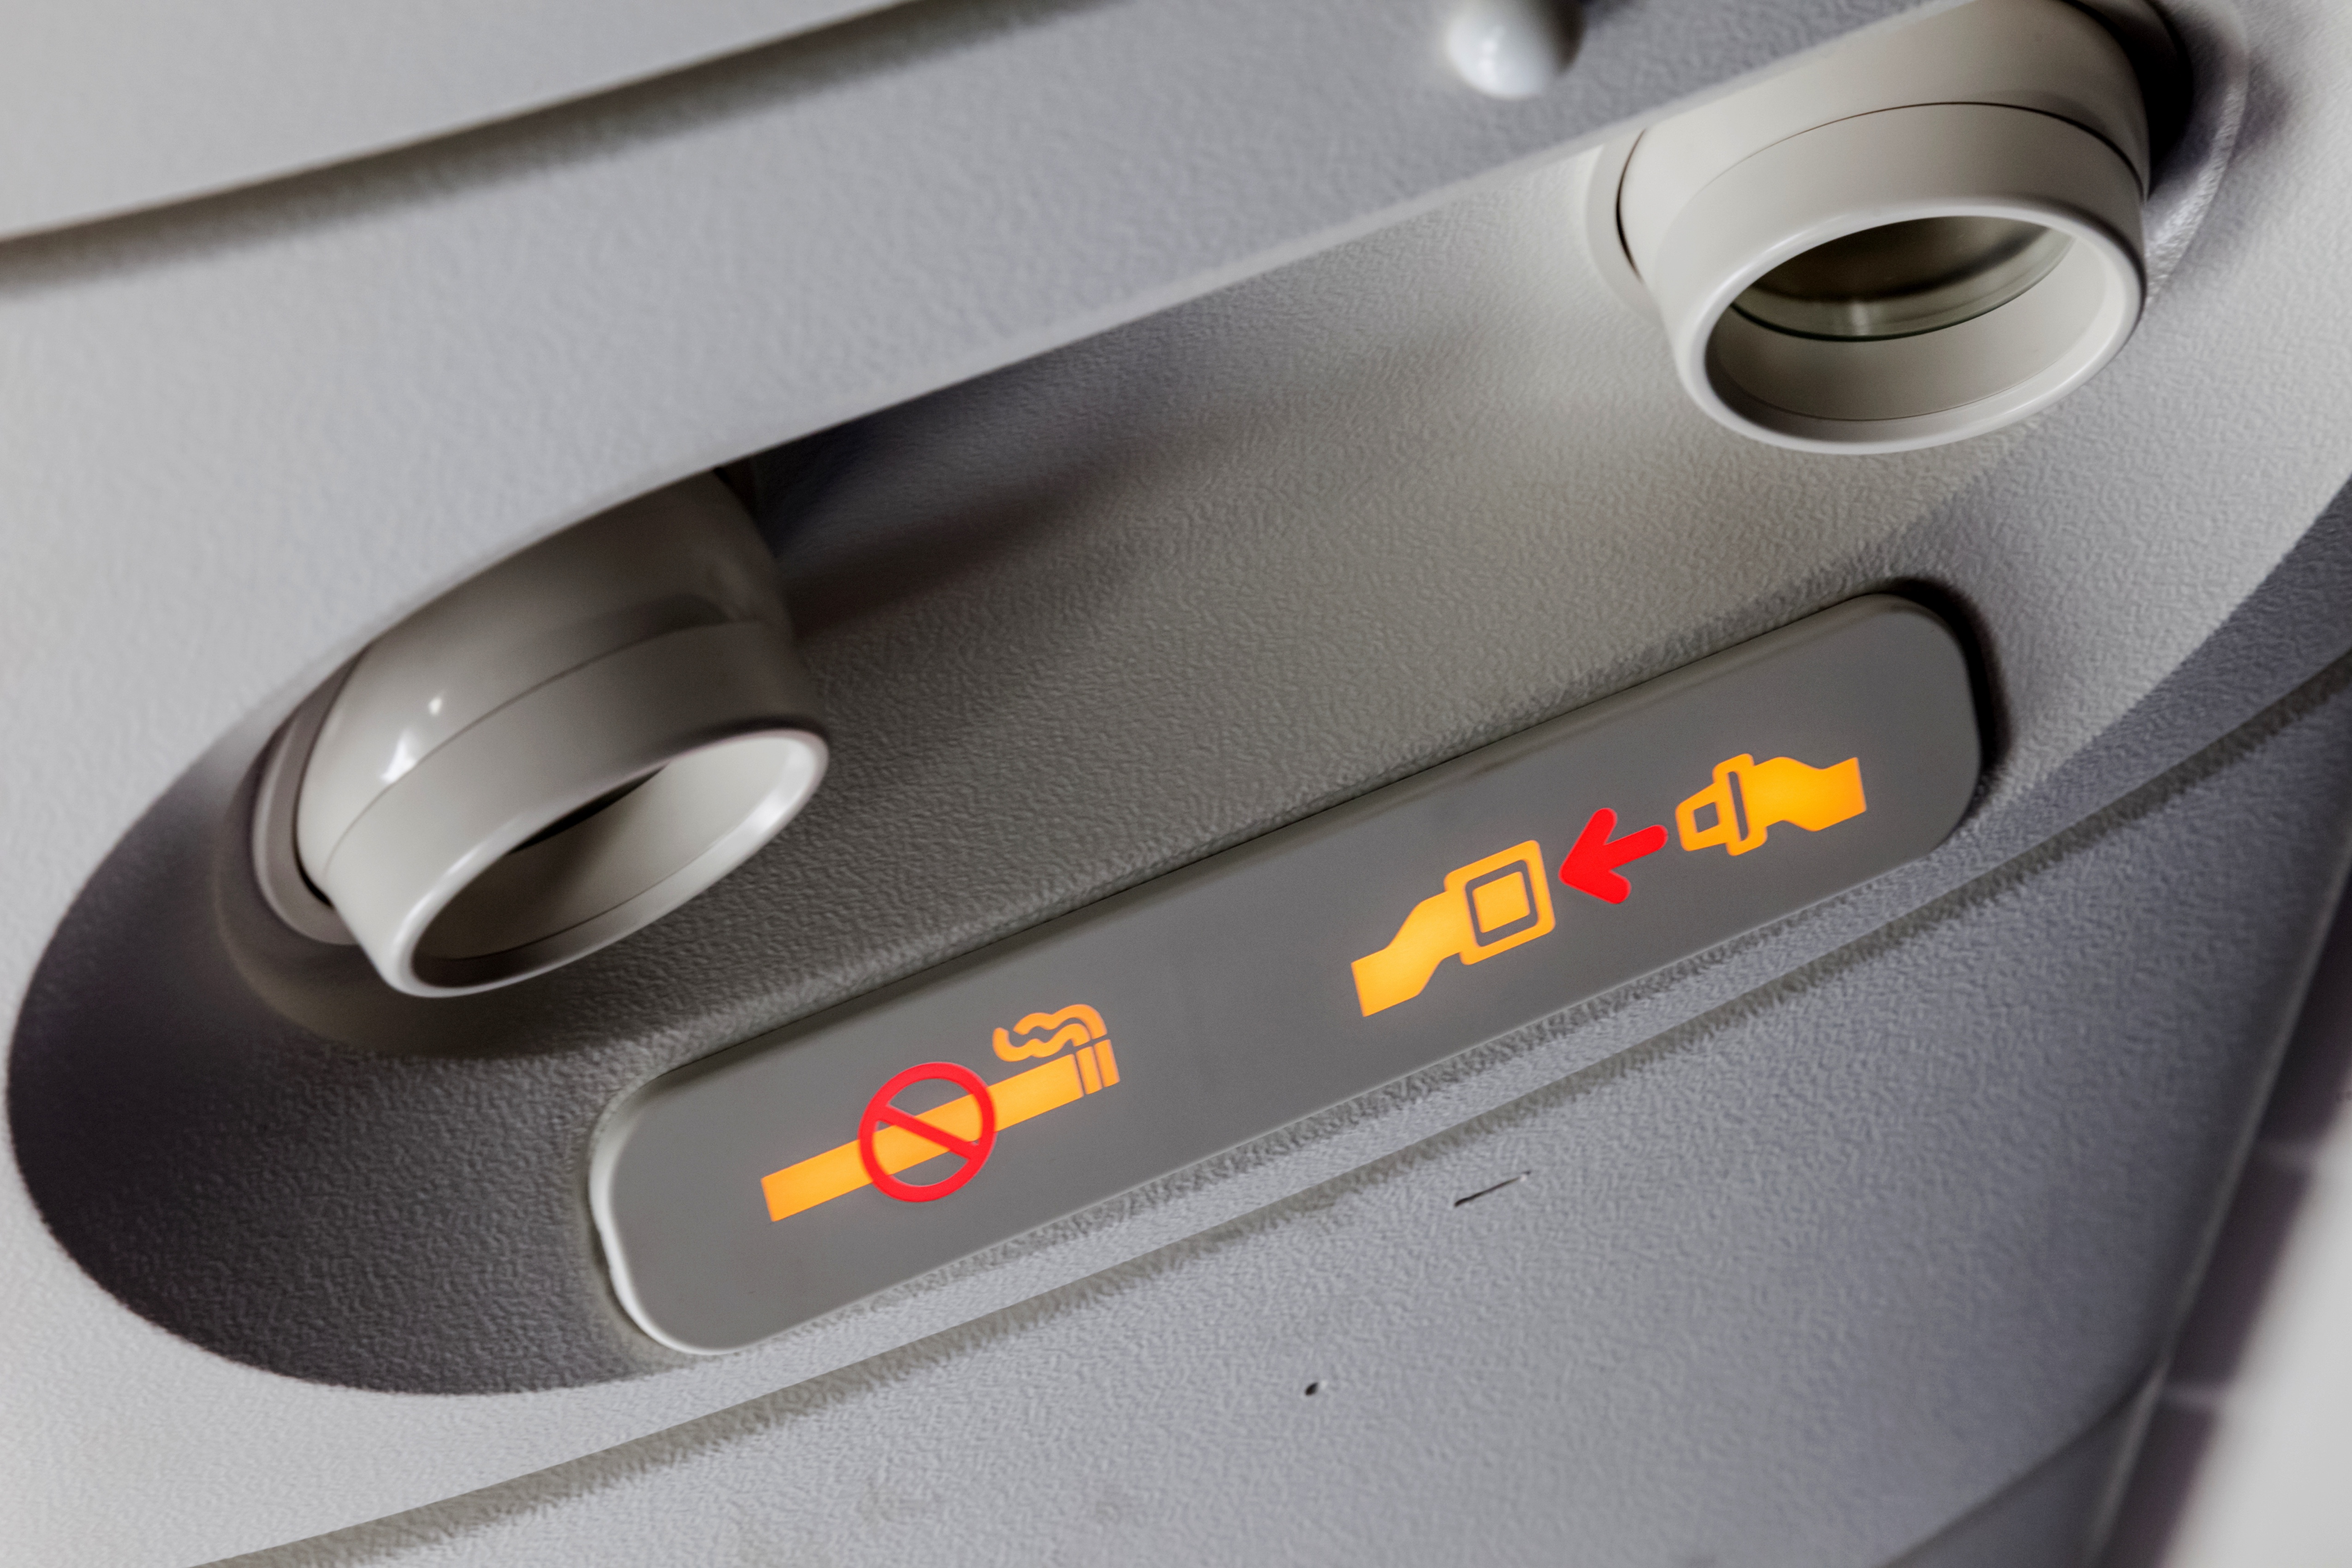 The fasten seatbelt sign on an airplane